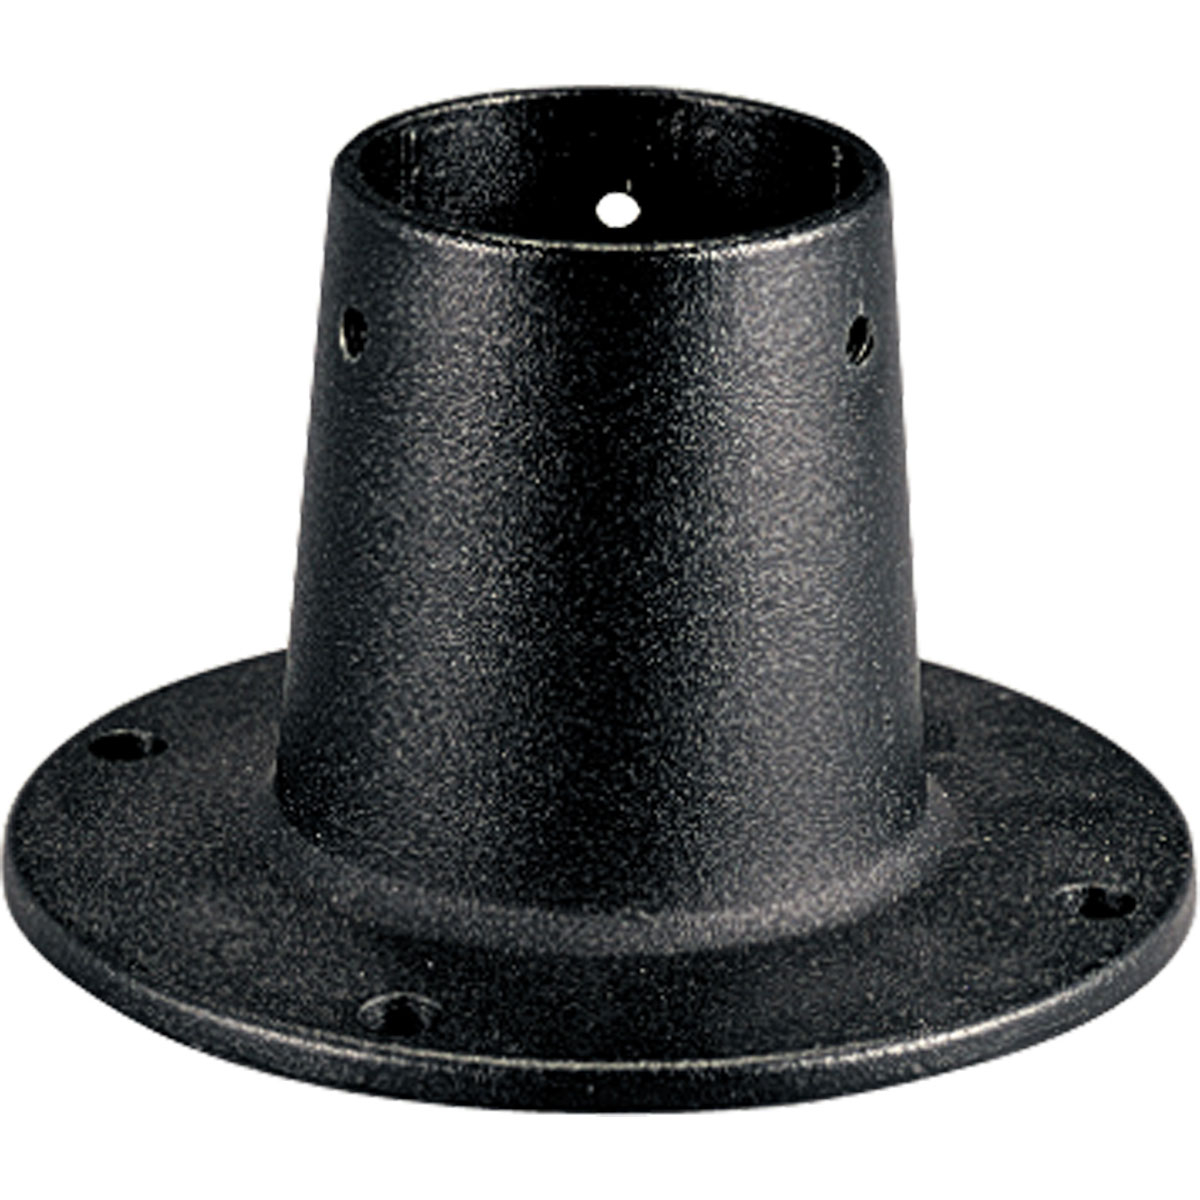 This cast aluminum surface mount post adapter will make a perfect addition to your home needs. Surface Mount Post Adapter. Flanged cast aluminum base for surface mounting round, 3 bottom O.D. posts. Anchor bolts and set screws included.